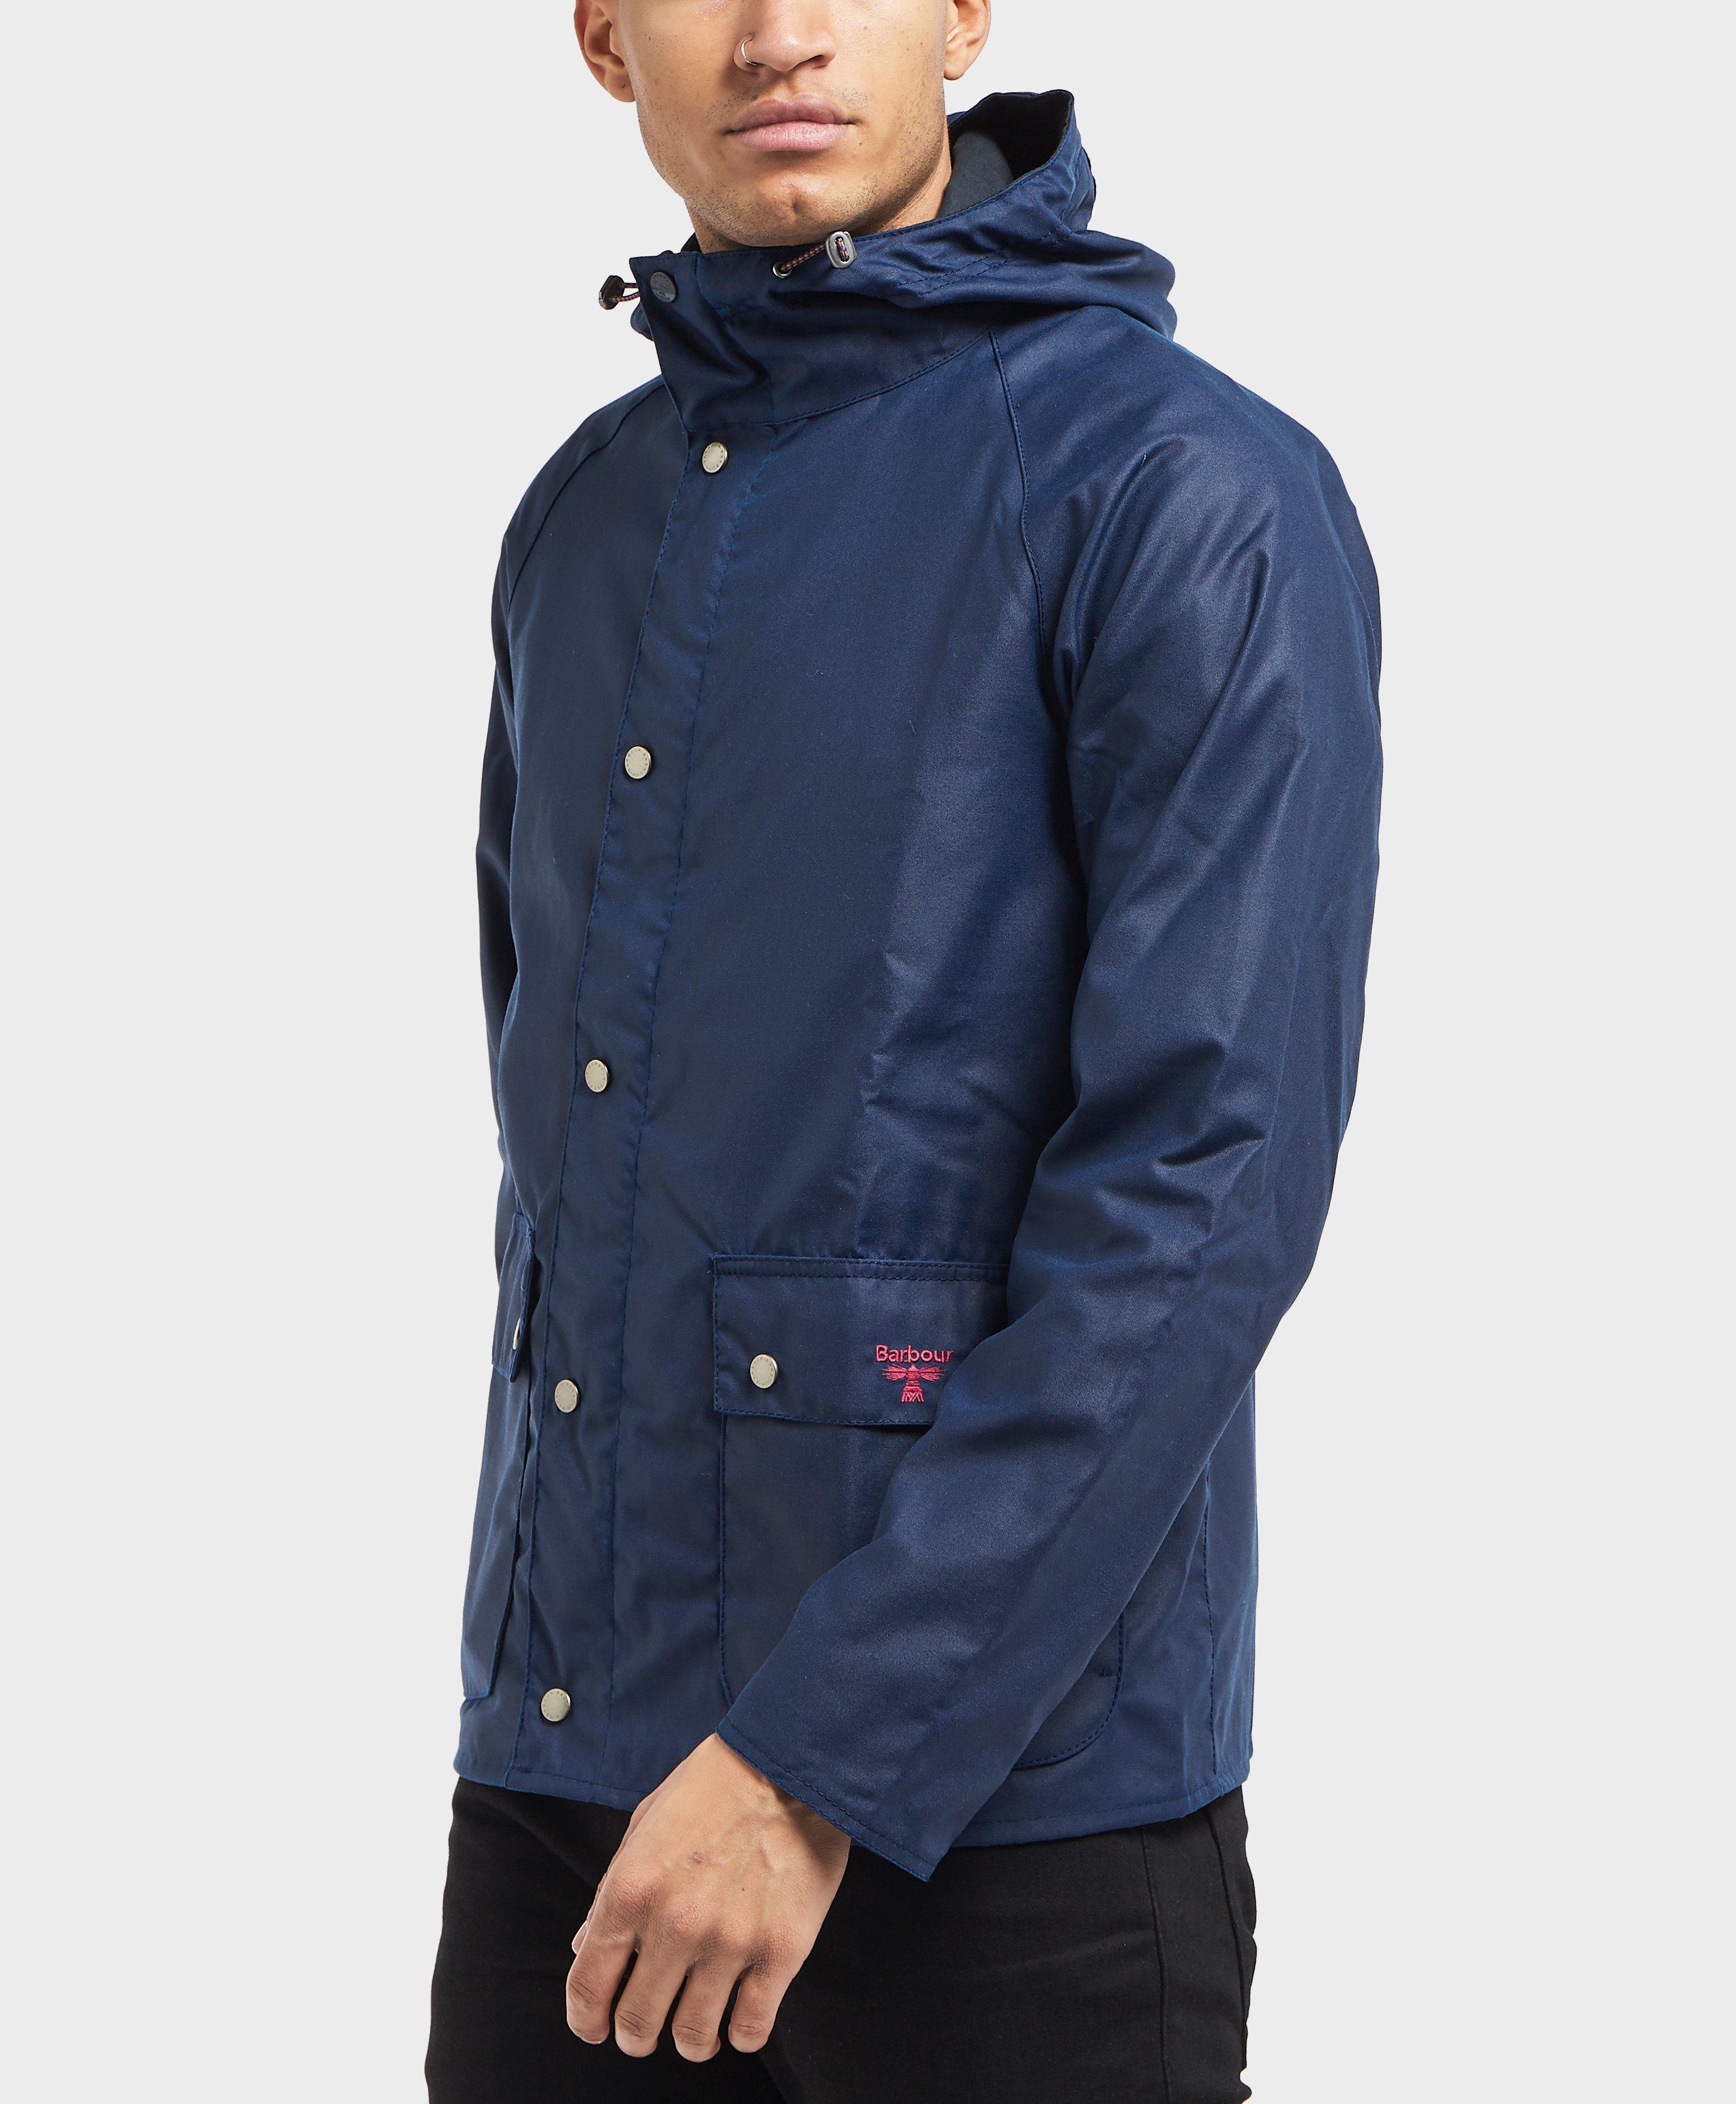 Barbour Synthetic Pass Waxed Jacket in Blue for Men - Lyst